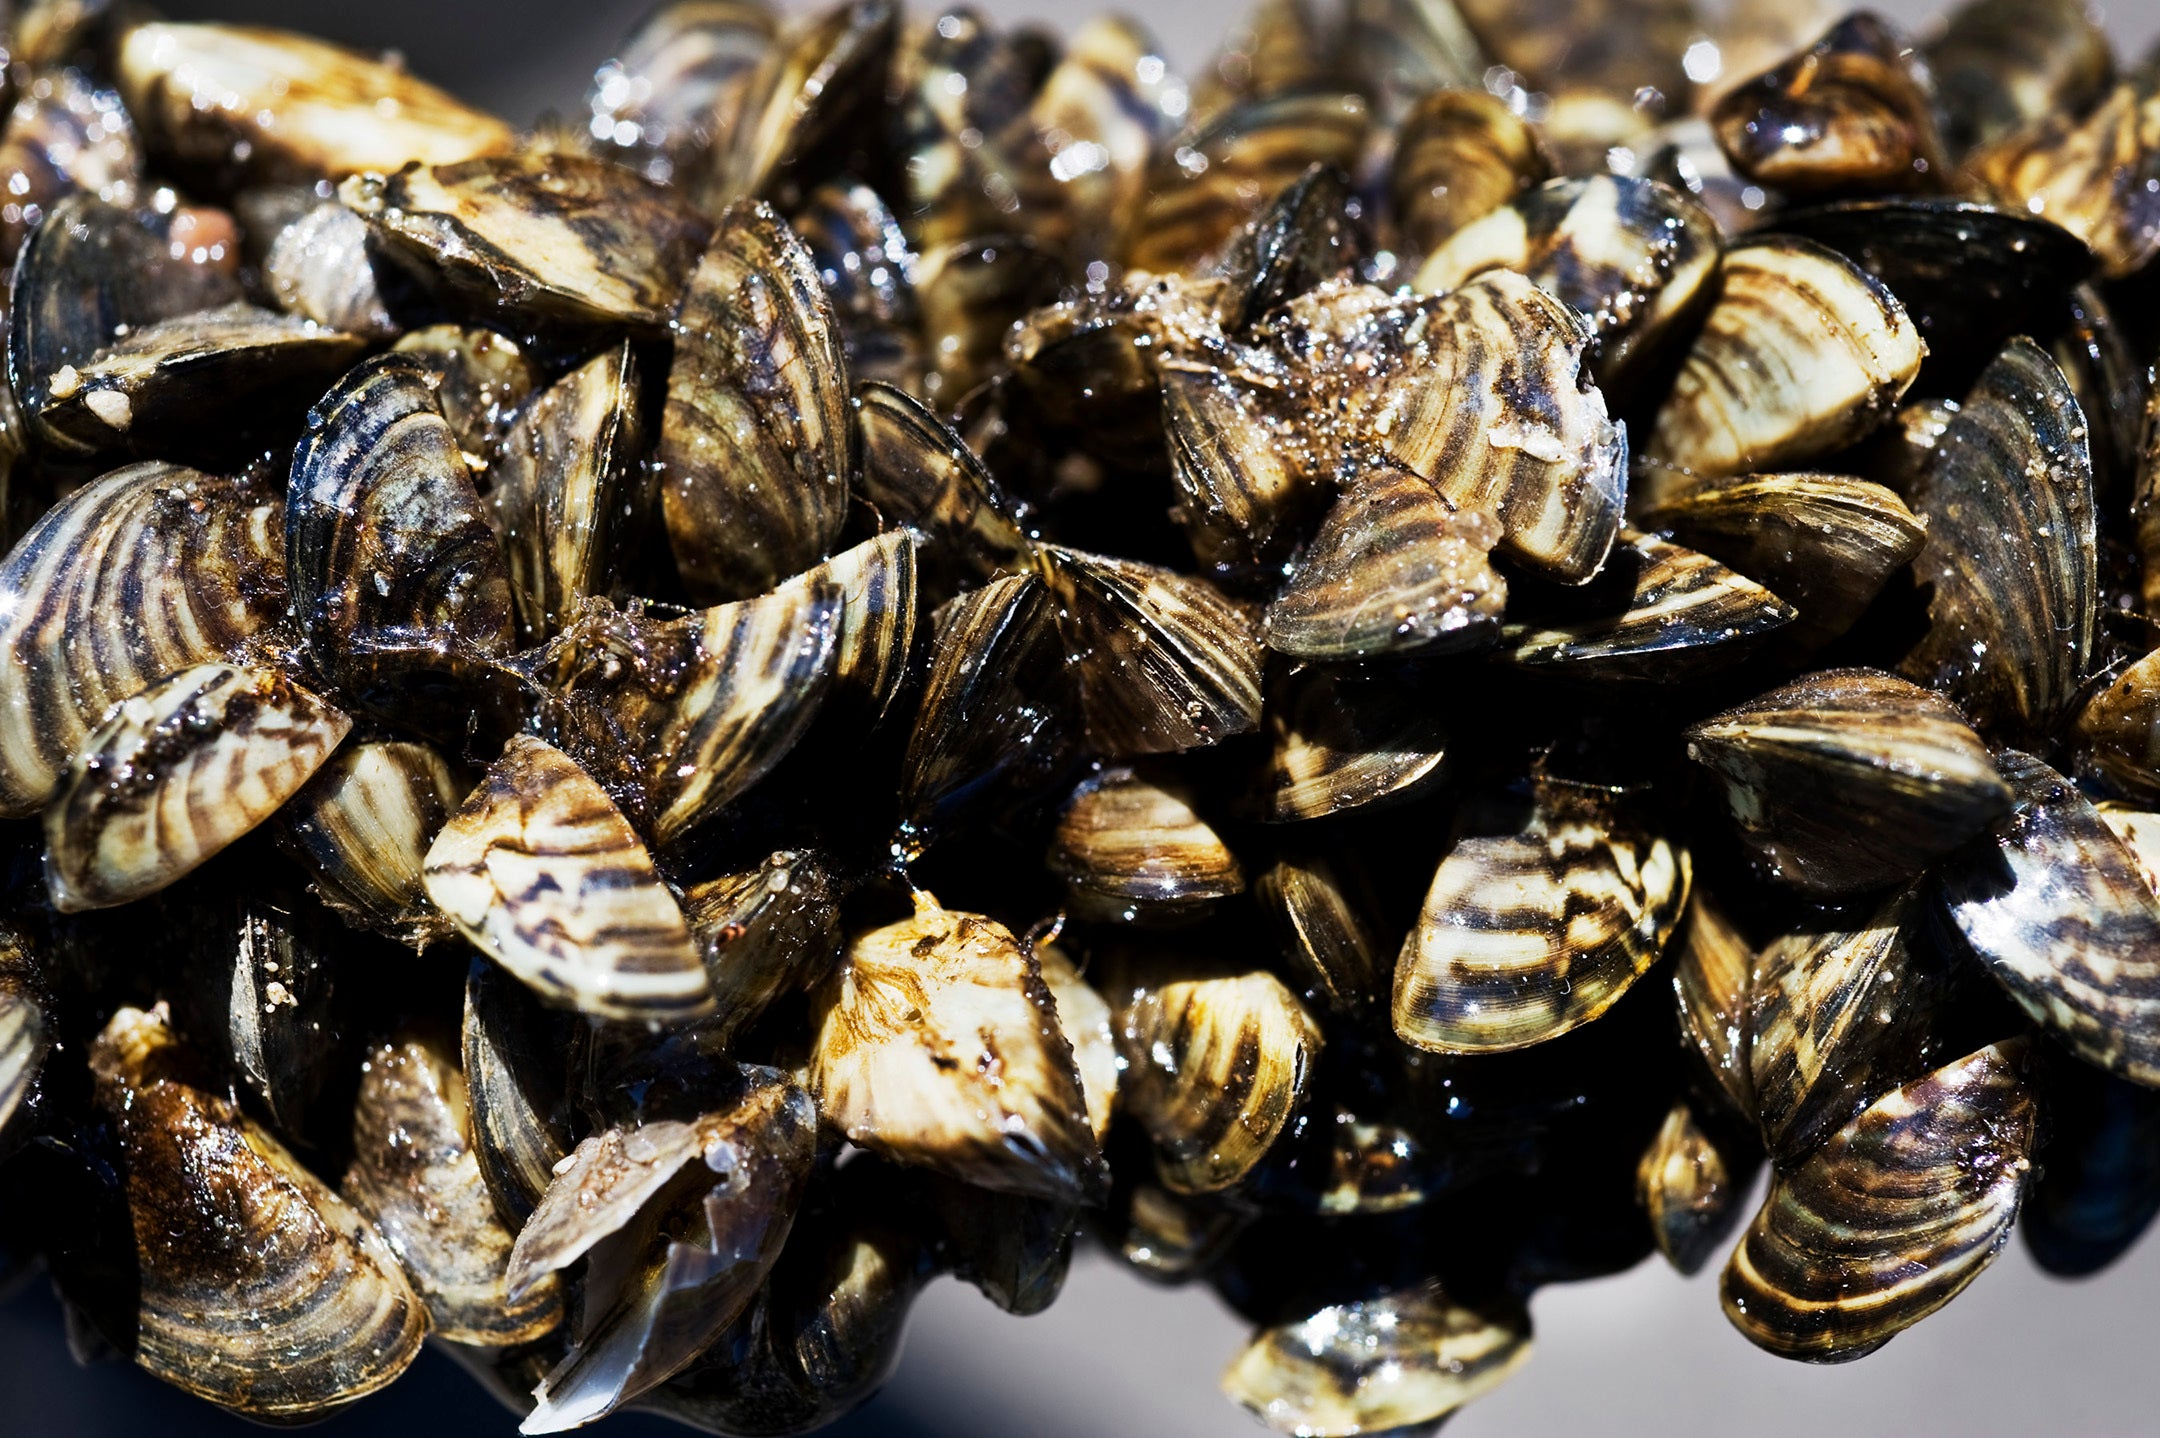 Zebra mussels clustered on a small tree branch. (Photo: David Brewster/Star Tribune via Getty Images, Getty Images)